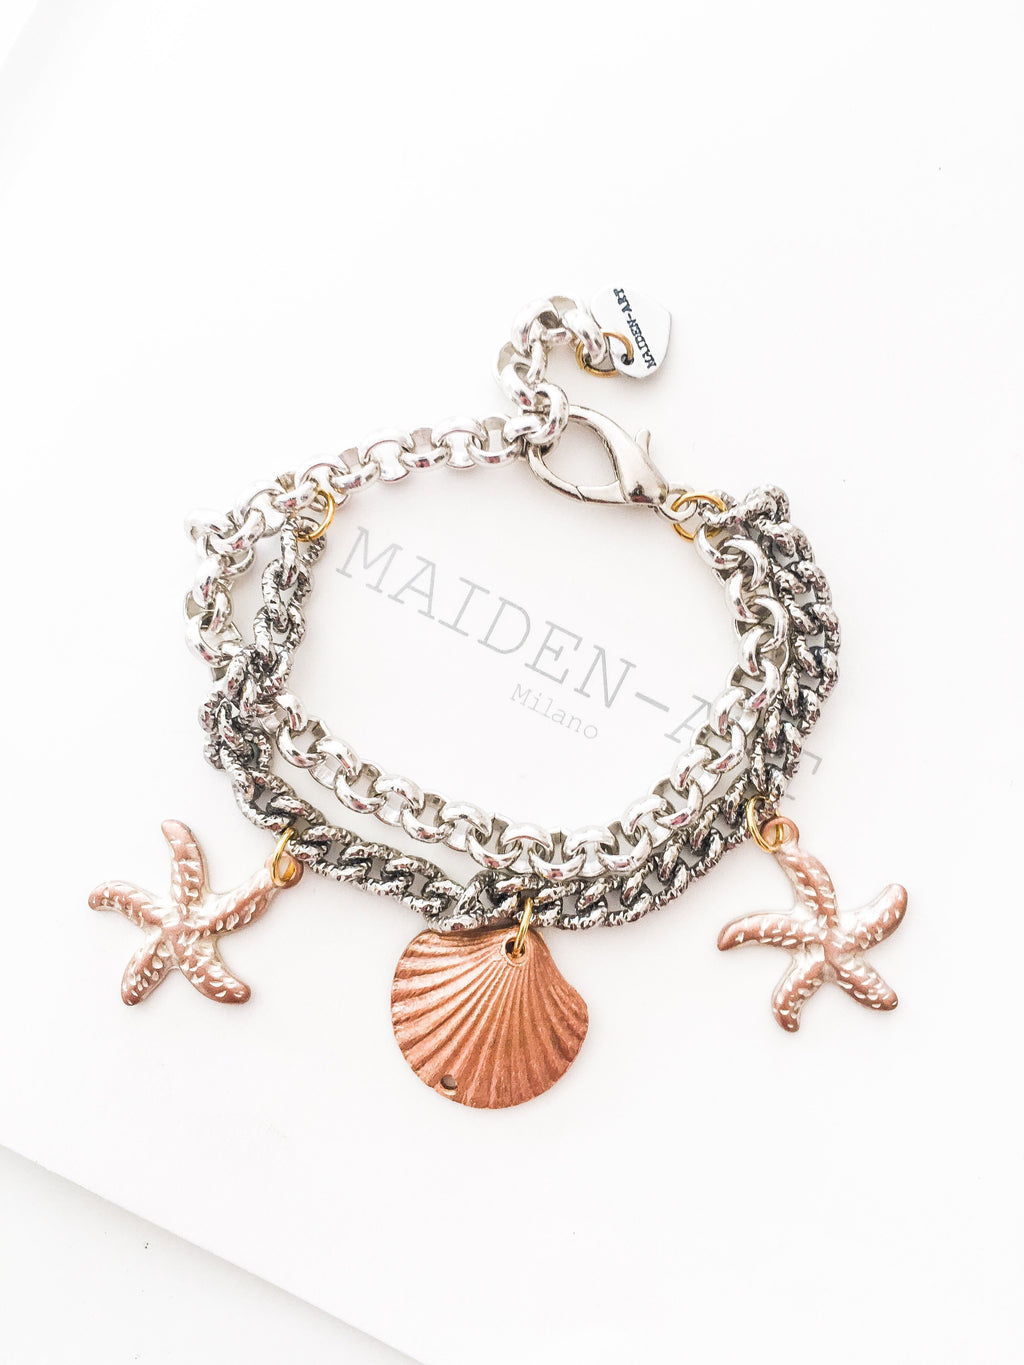 Statement Bracelet with Shell and Starfish Charms.